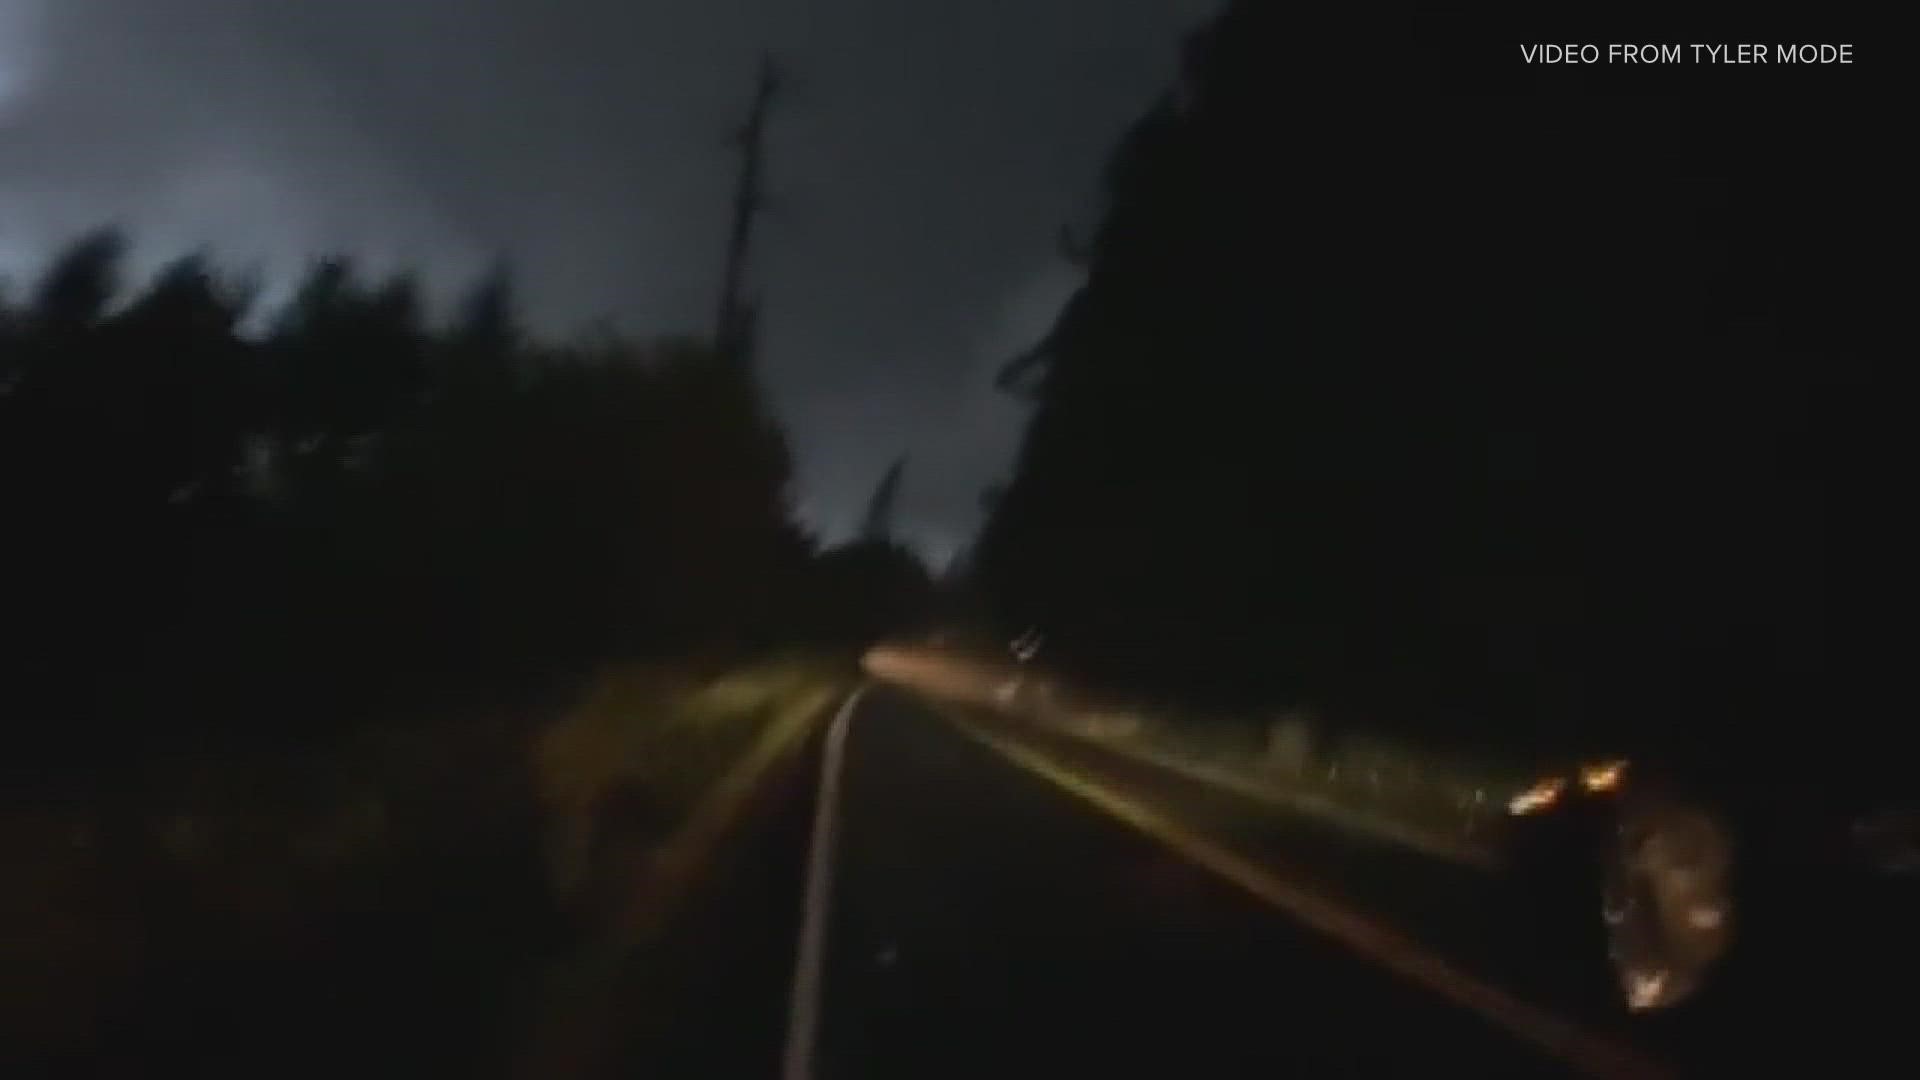 Severe weather tore through Southwest Washington Monday evening, including a 'weak' tornado in Battle Ground, Wash., the National Weather Service confirmed.